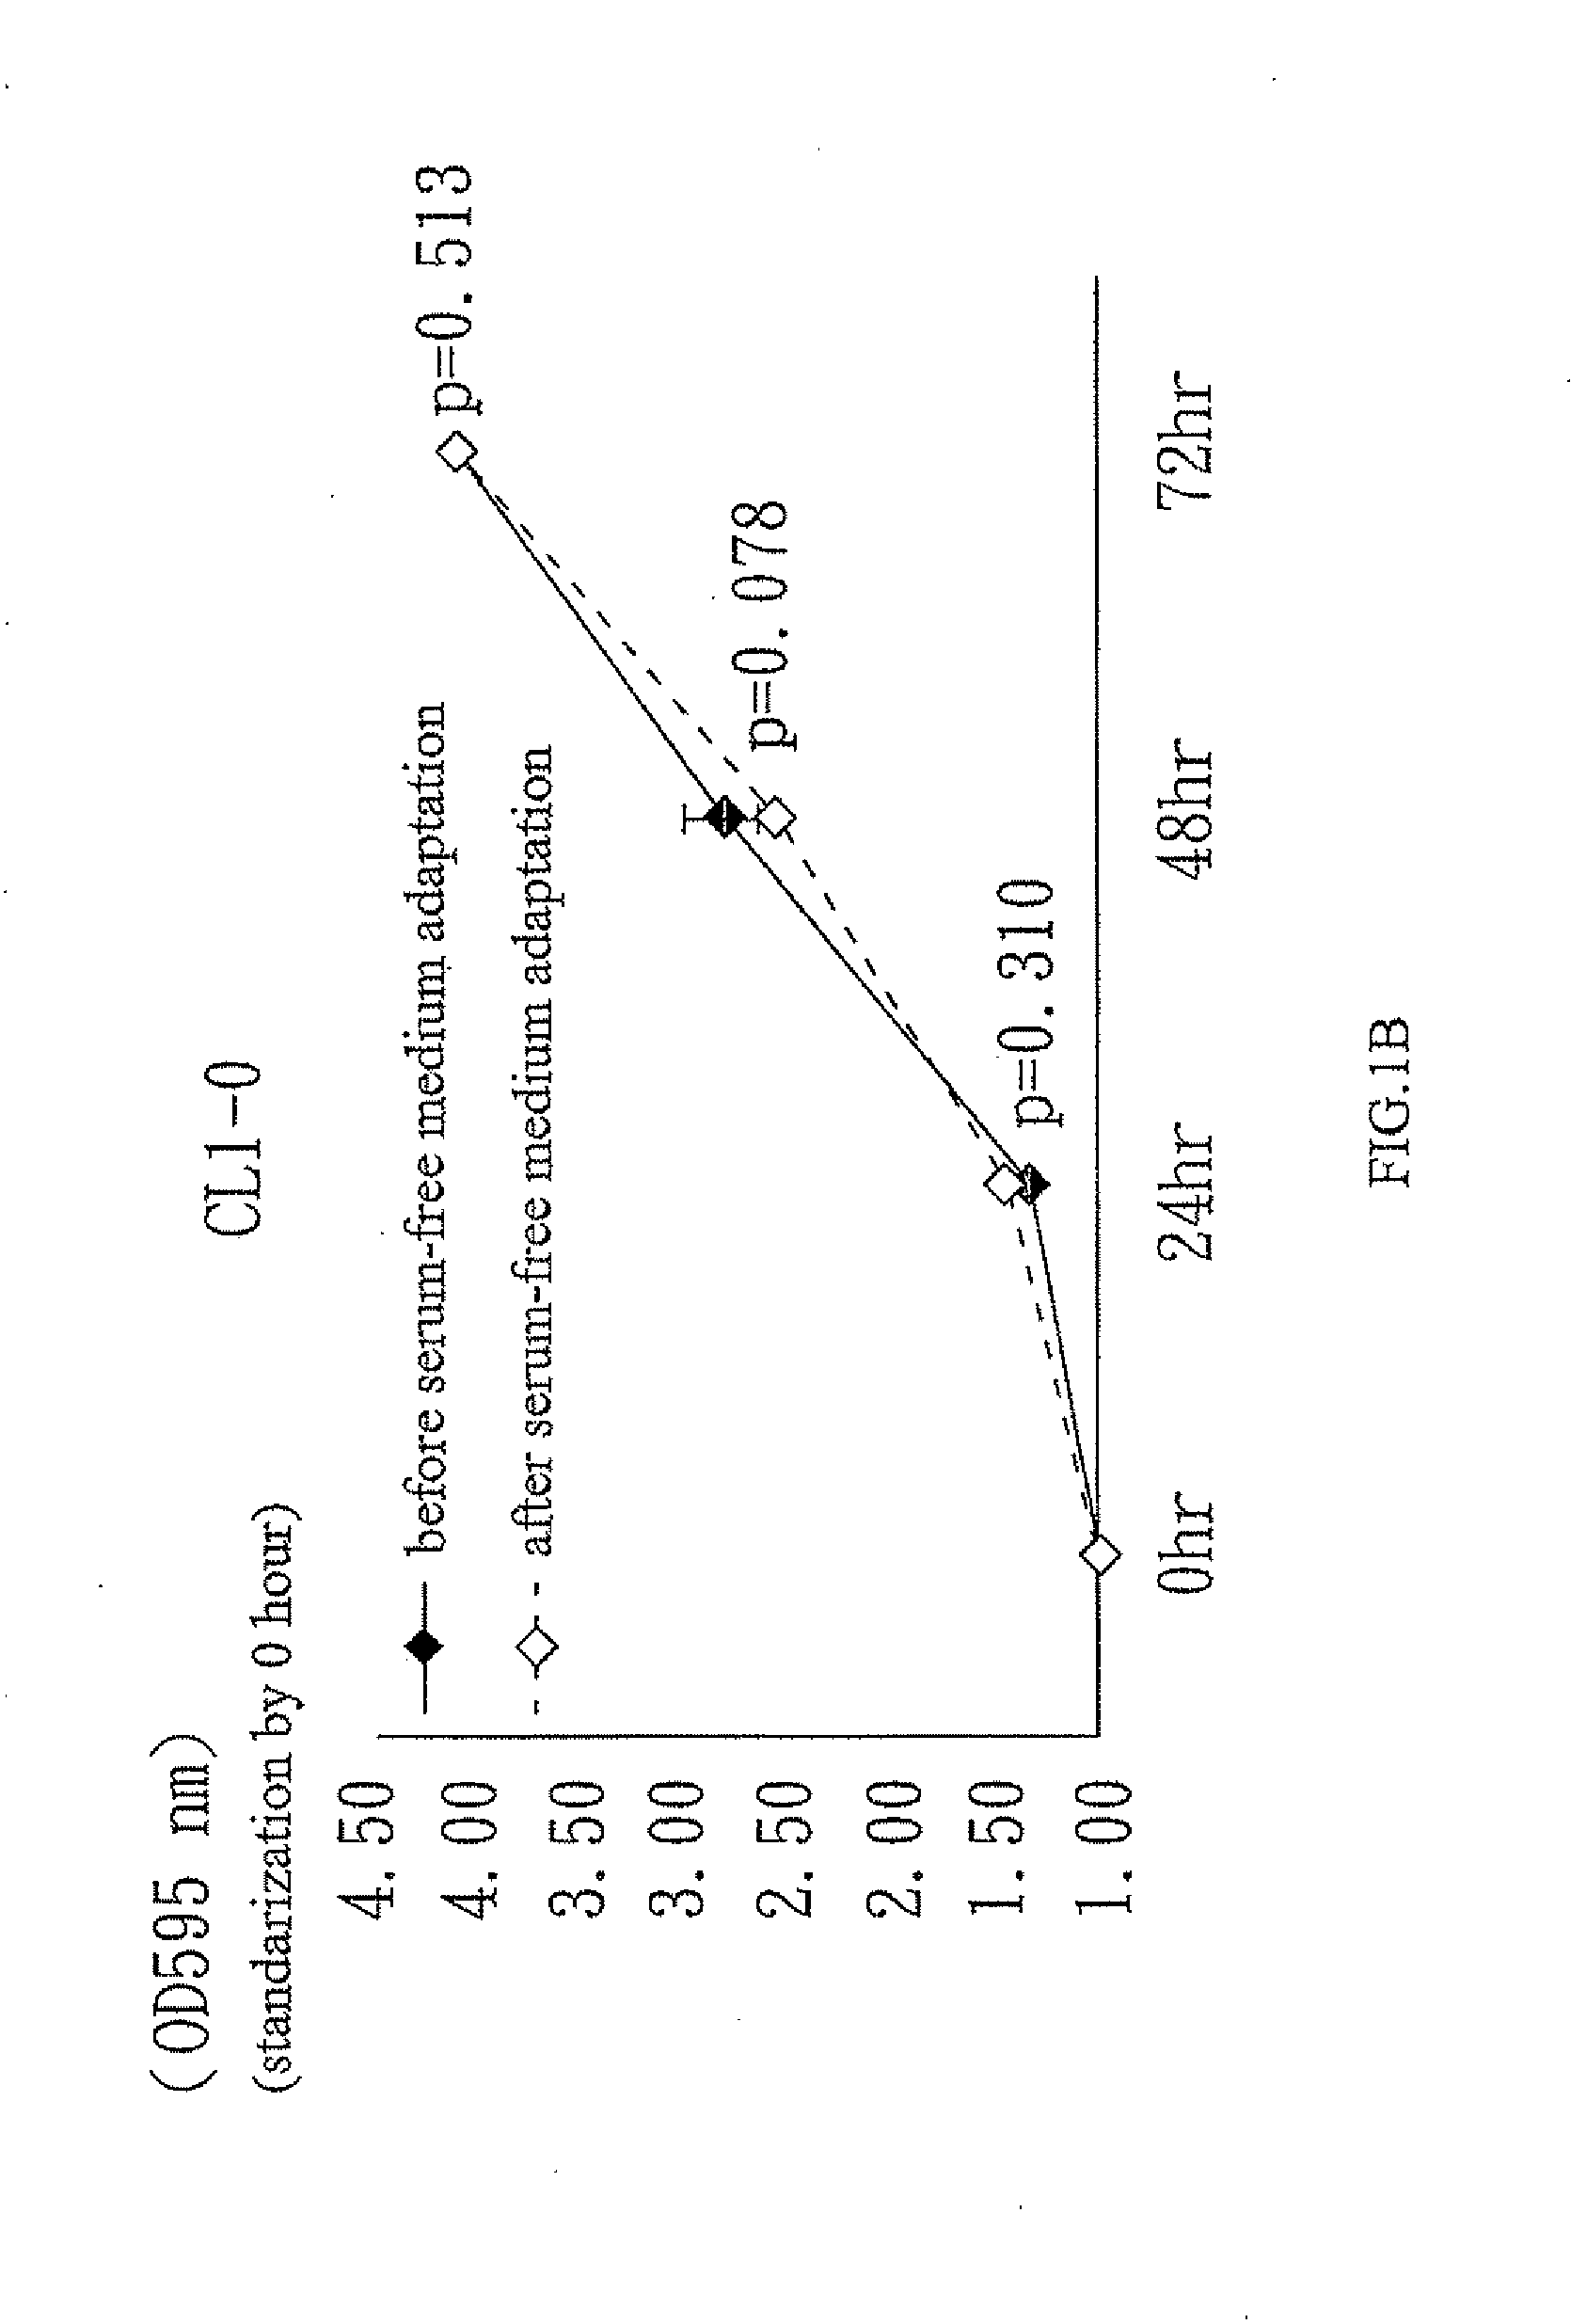 Methods and biomarker for evaluating cancer metastasis, pharmaceutical composition for inhibiting cancer metastasis, and method for analyzing secretome